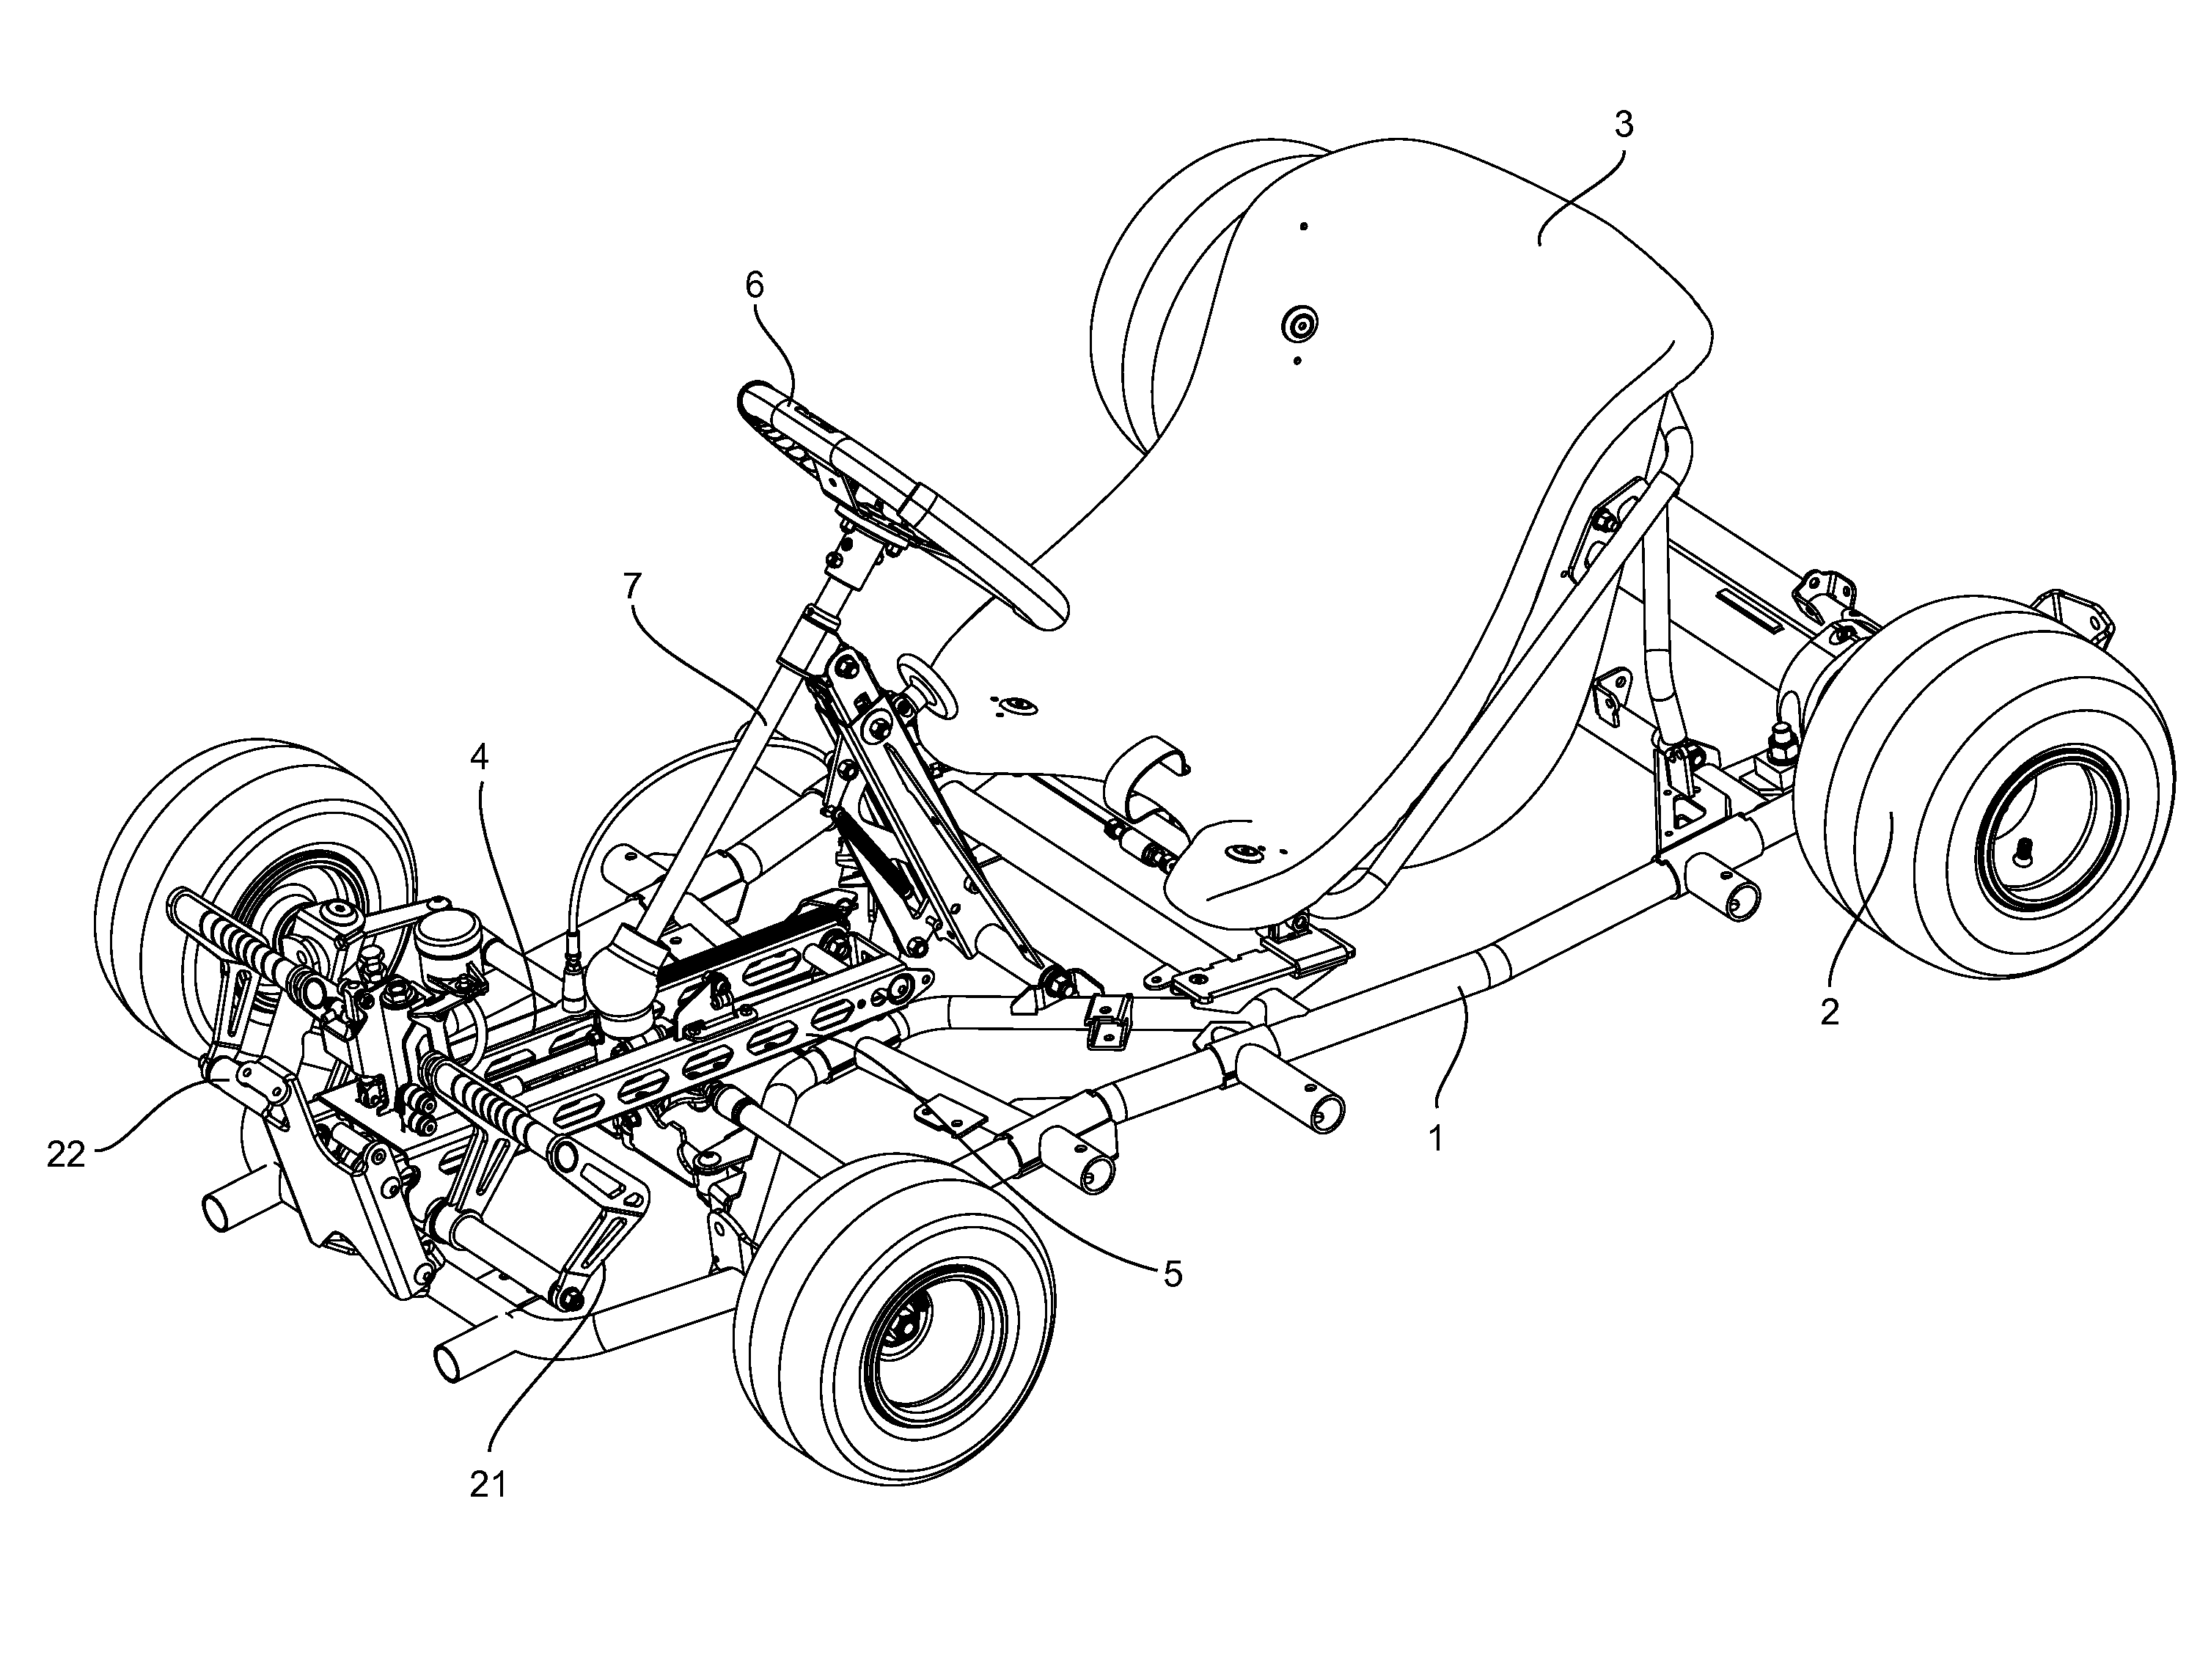 Kart Chassis with Increased Impact Resistance, and Corresponding Kart